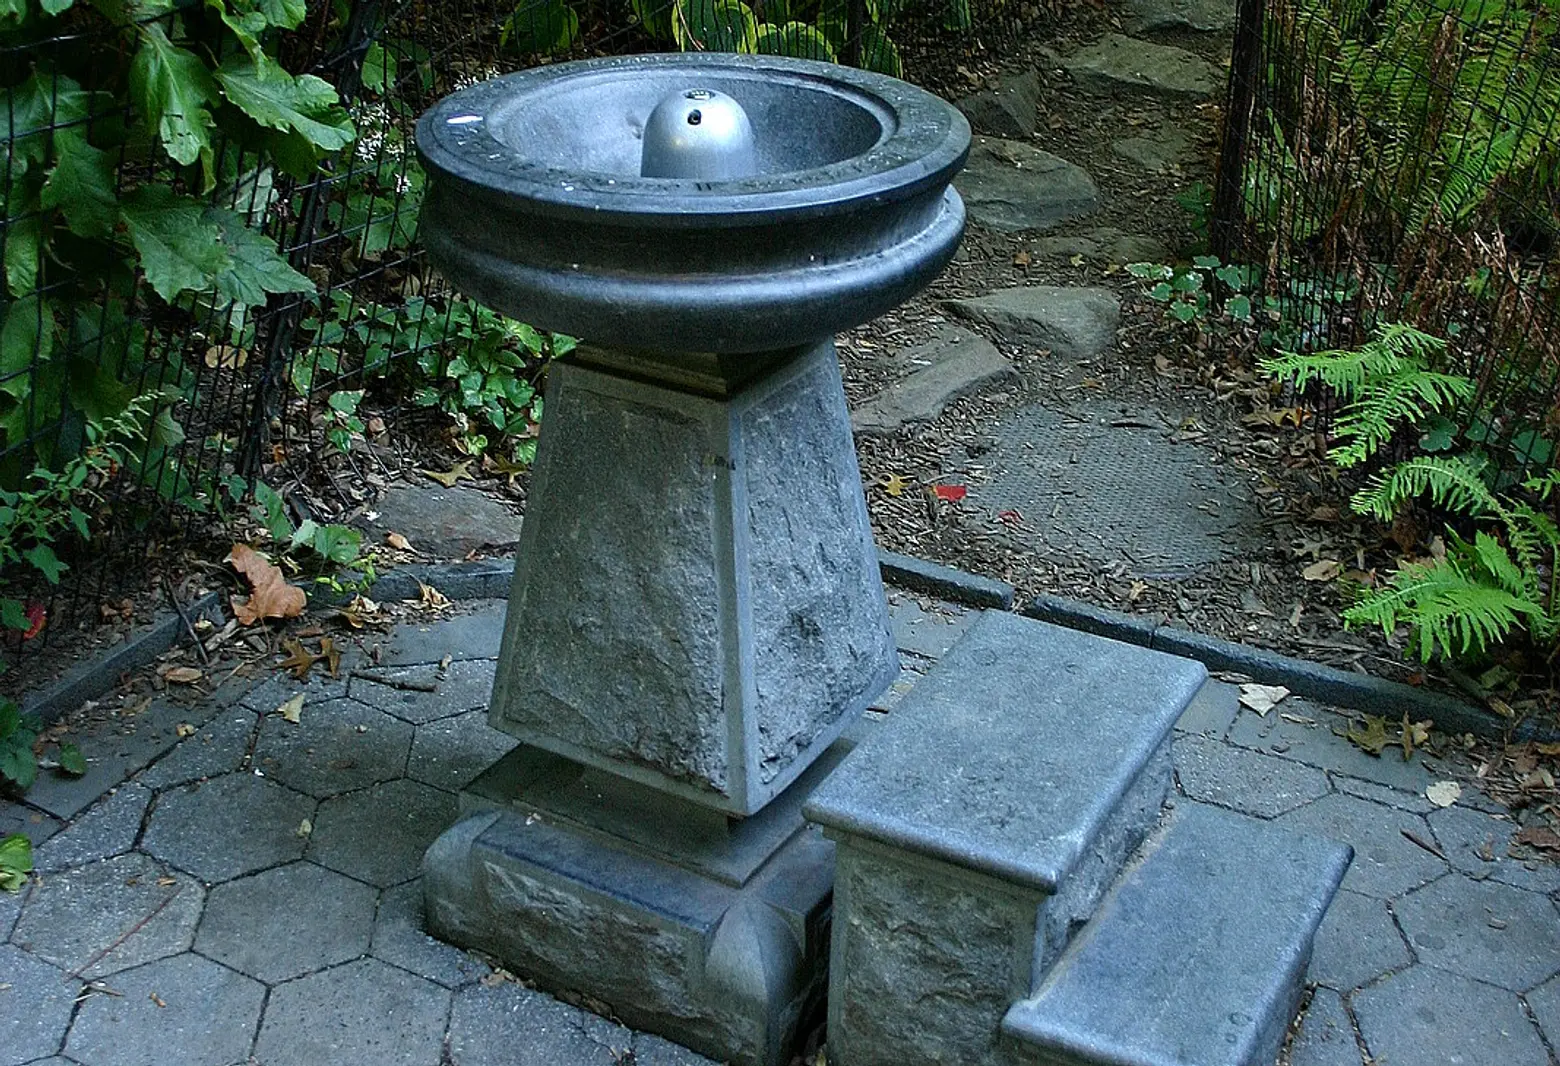 Bringing Back Drinking Fountains in NYC; Run Your Gadgets on Solar Energy with a Simple Outlet Adapter